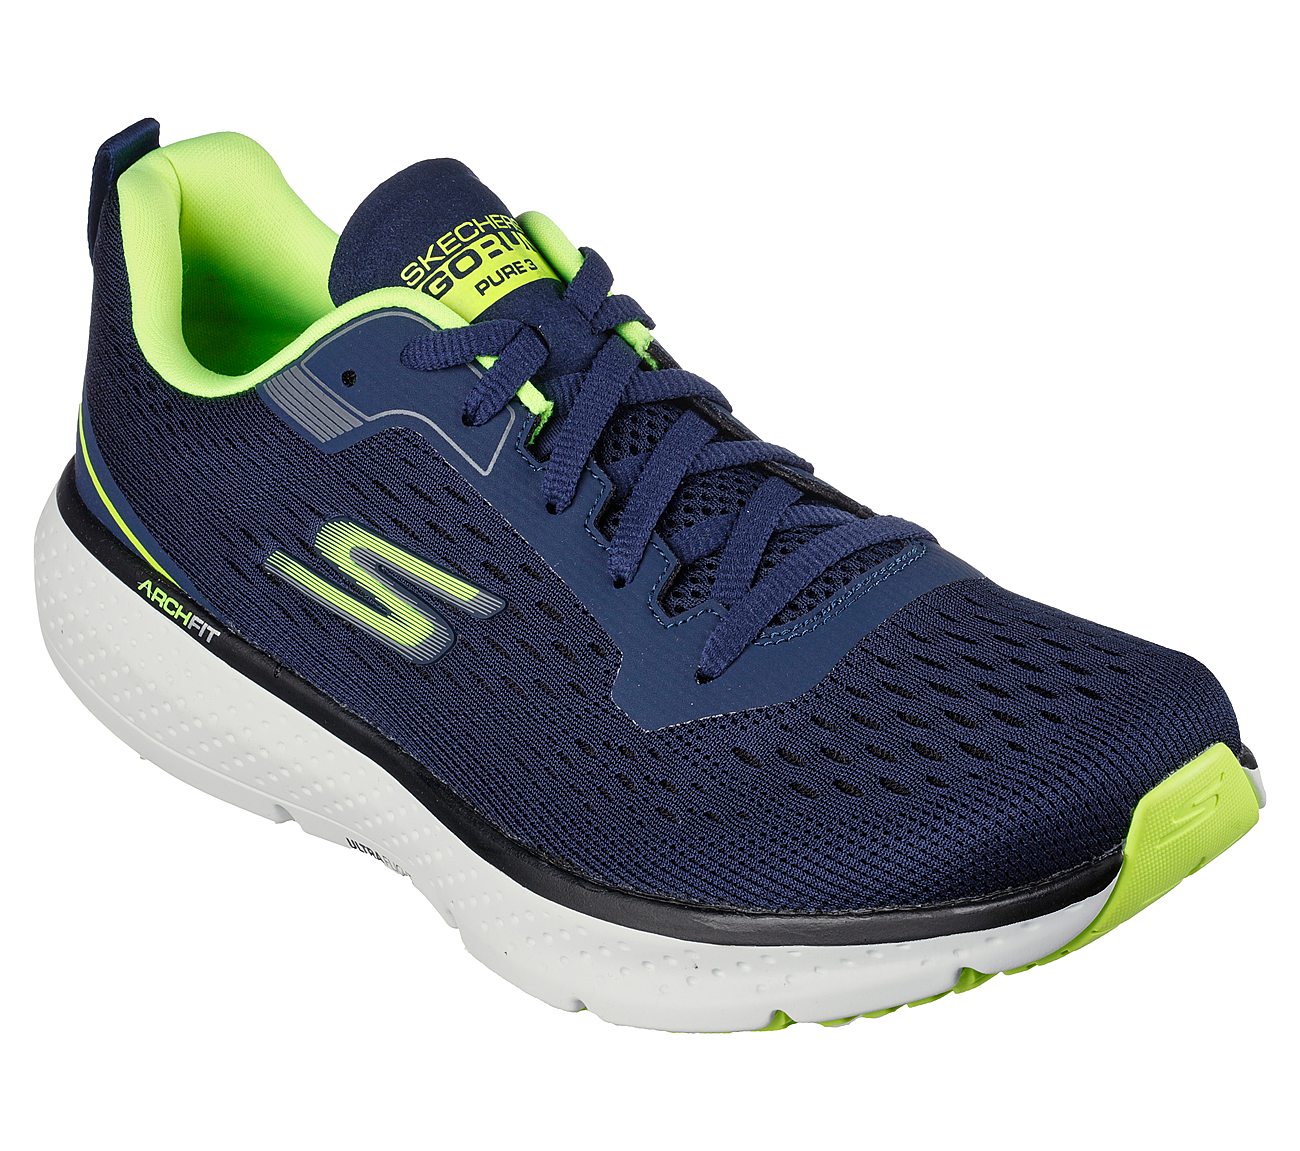 GO RUN PURE 3, NAVY/YELLOW Footwear Right View